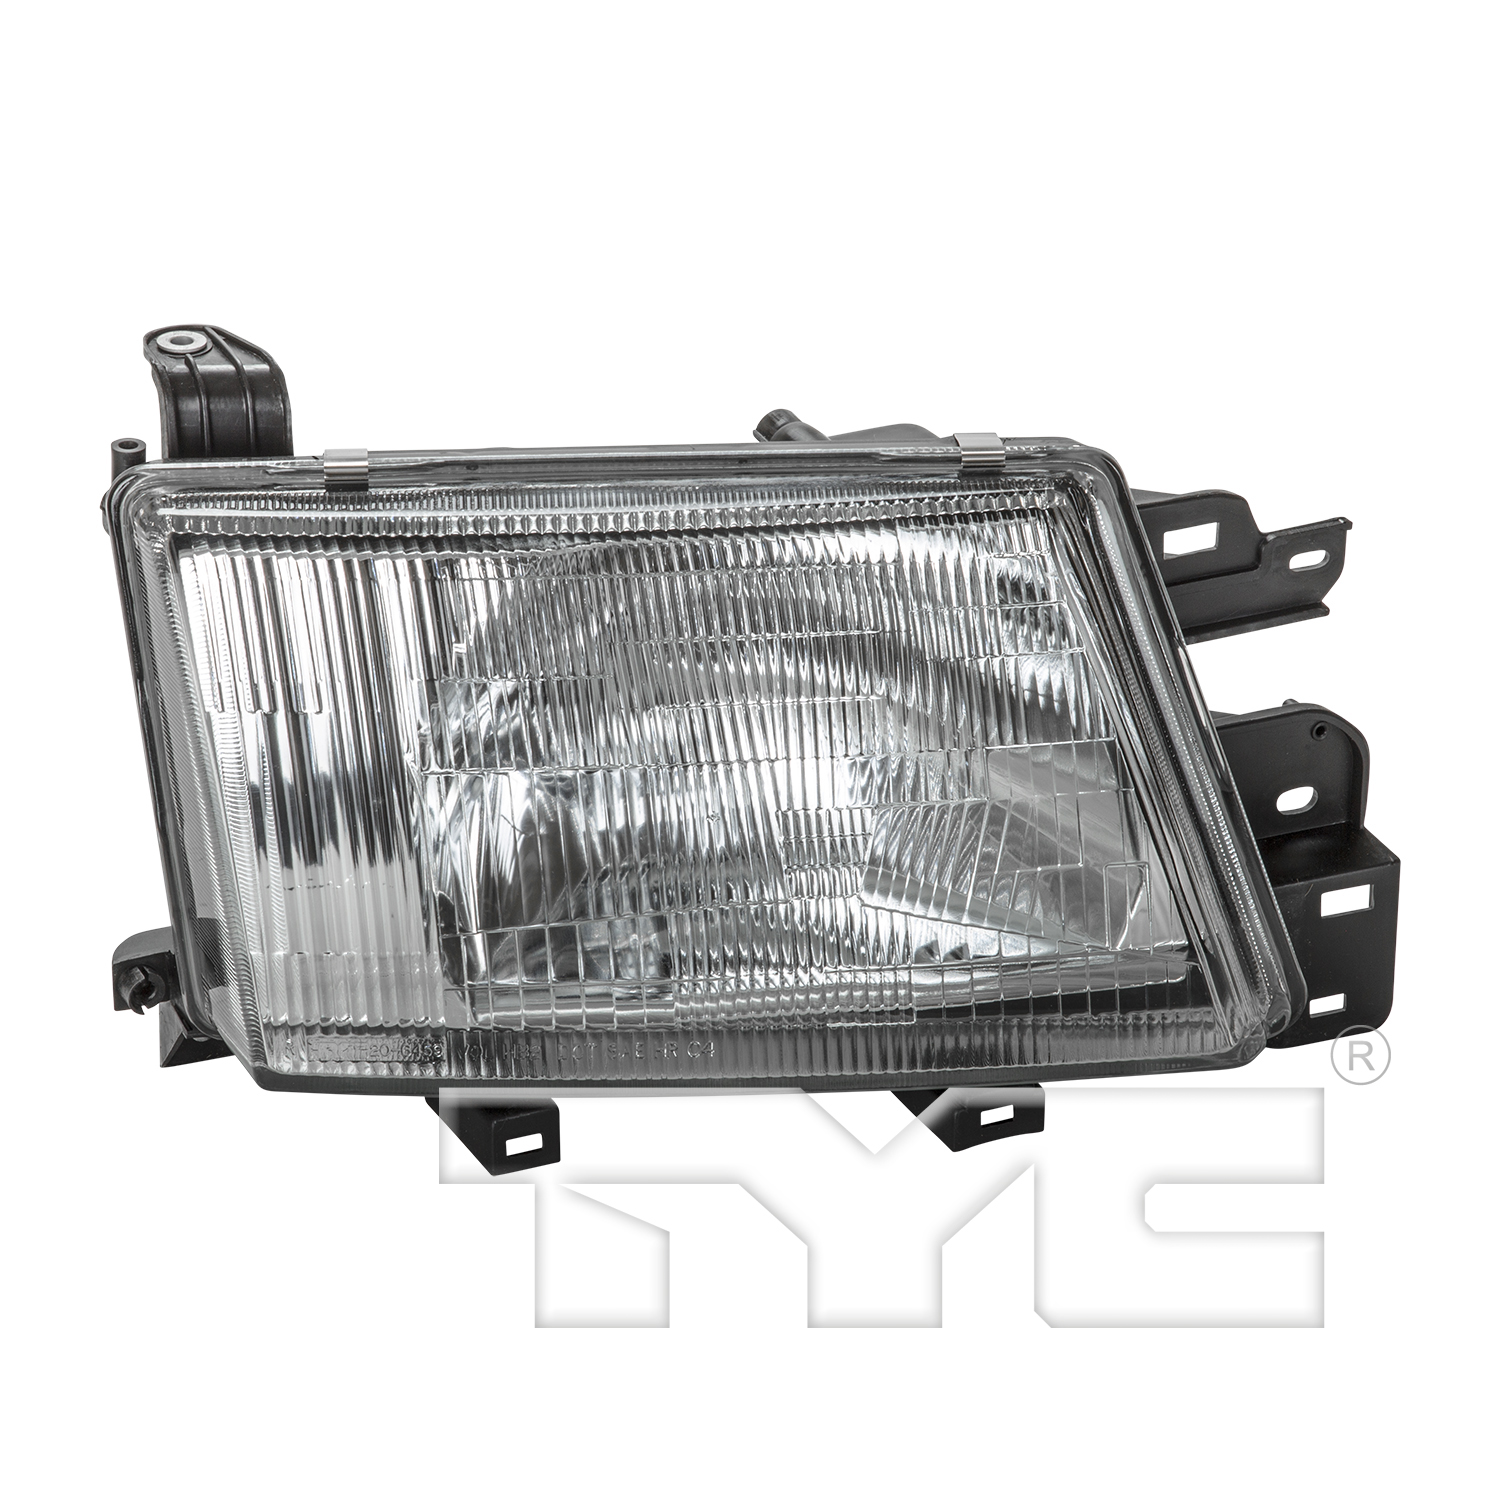 Aftermarket HEADLIGHTS for SUBARU - FORESTER, FORESTER,99-00,RT Headlamp assy composite